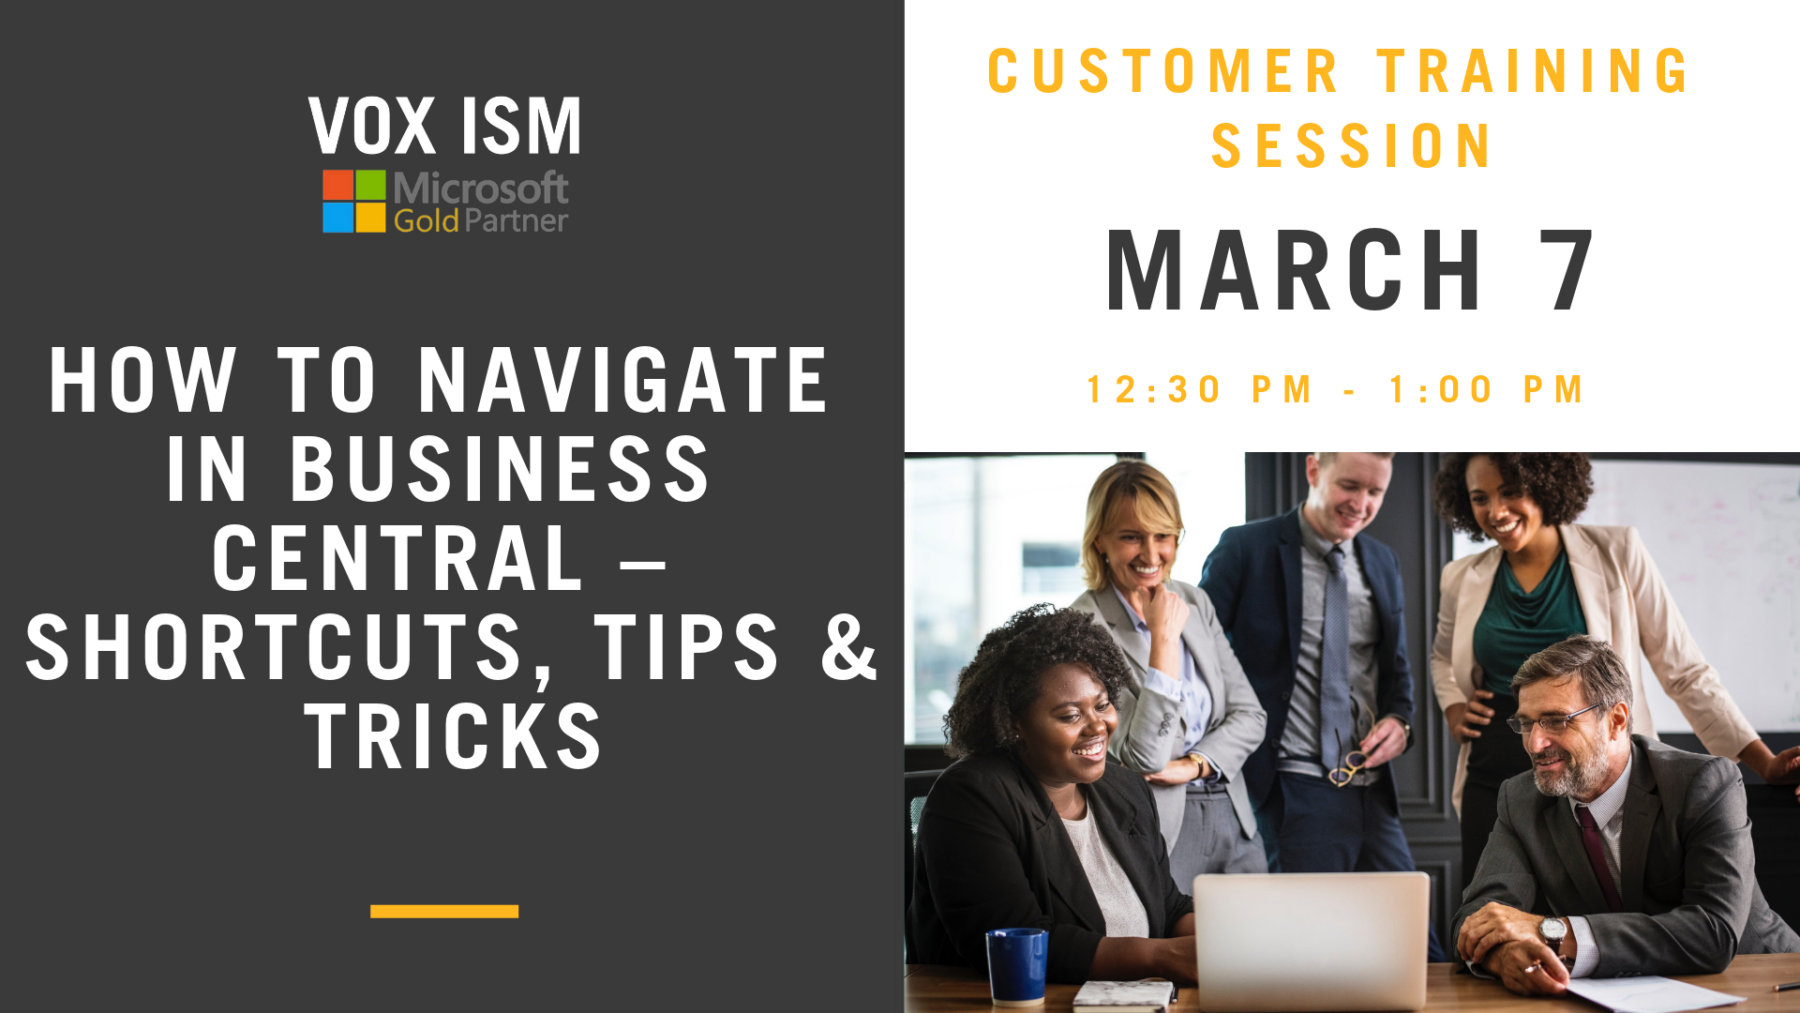 How To Navigate In Business Central – Shortcuts, Tips & tricks – March 7 – Customer Session